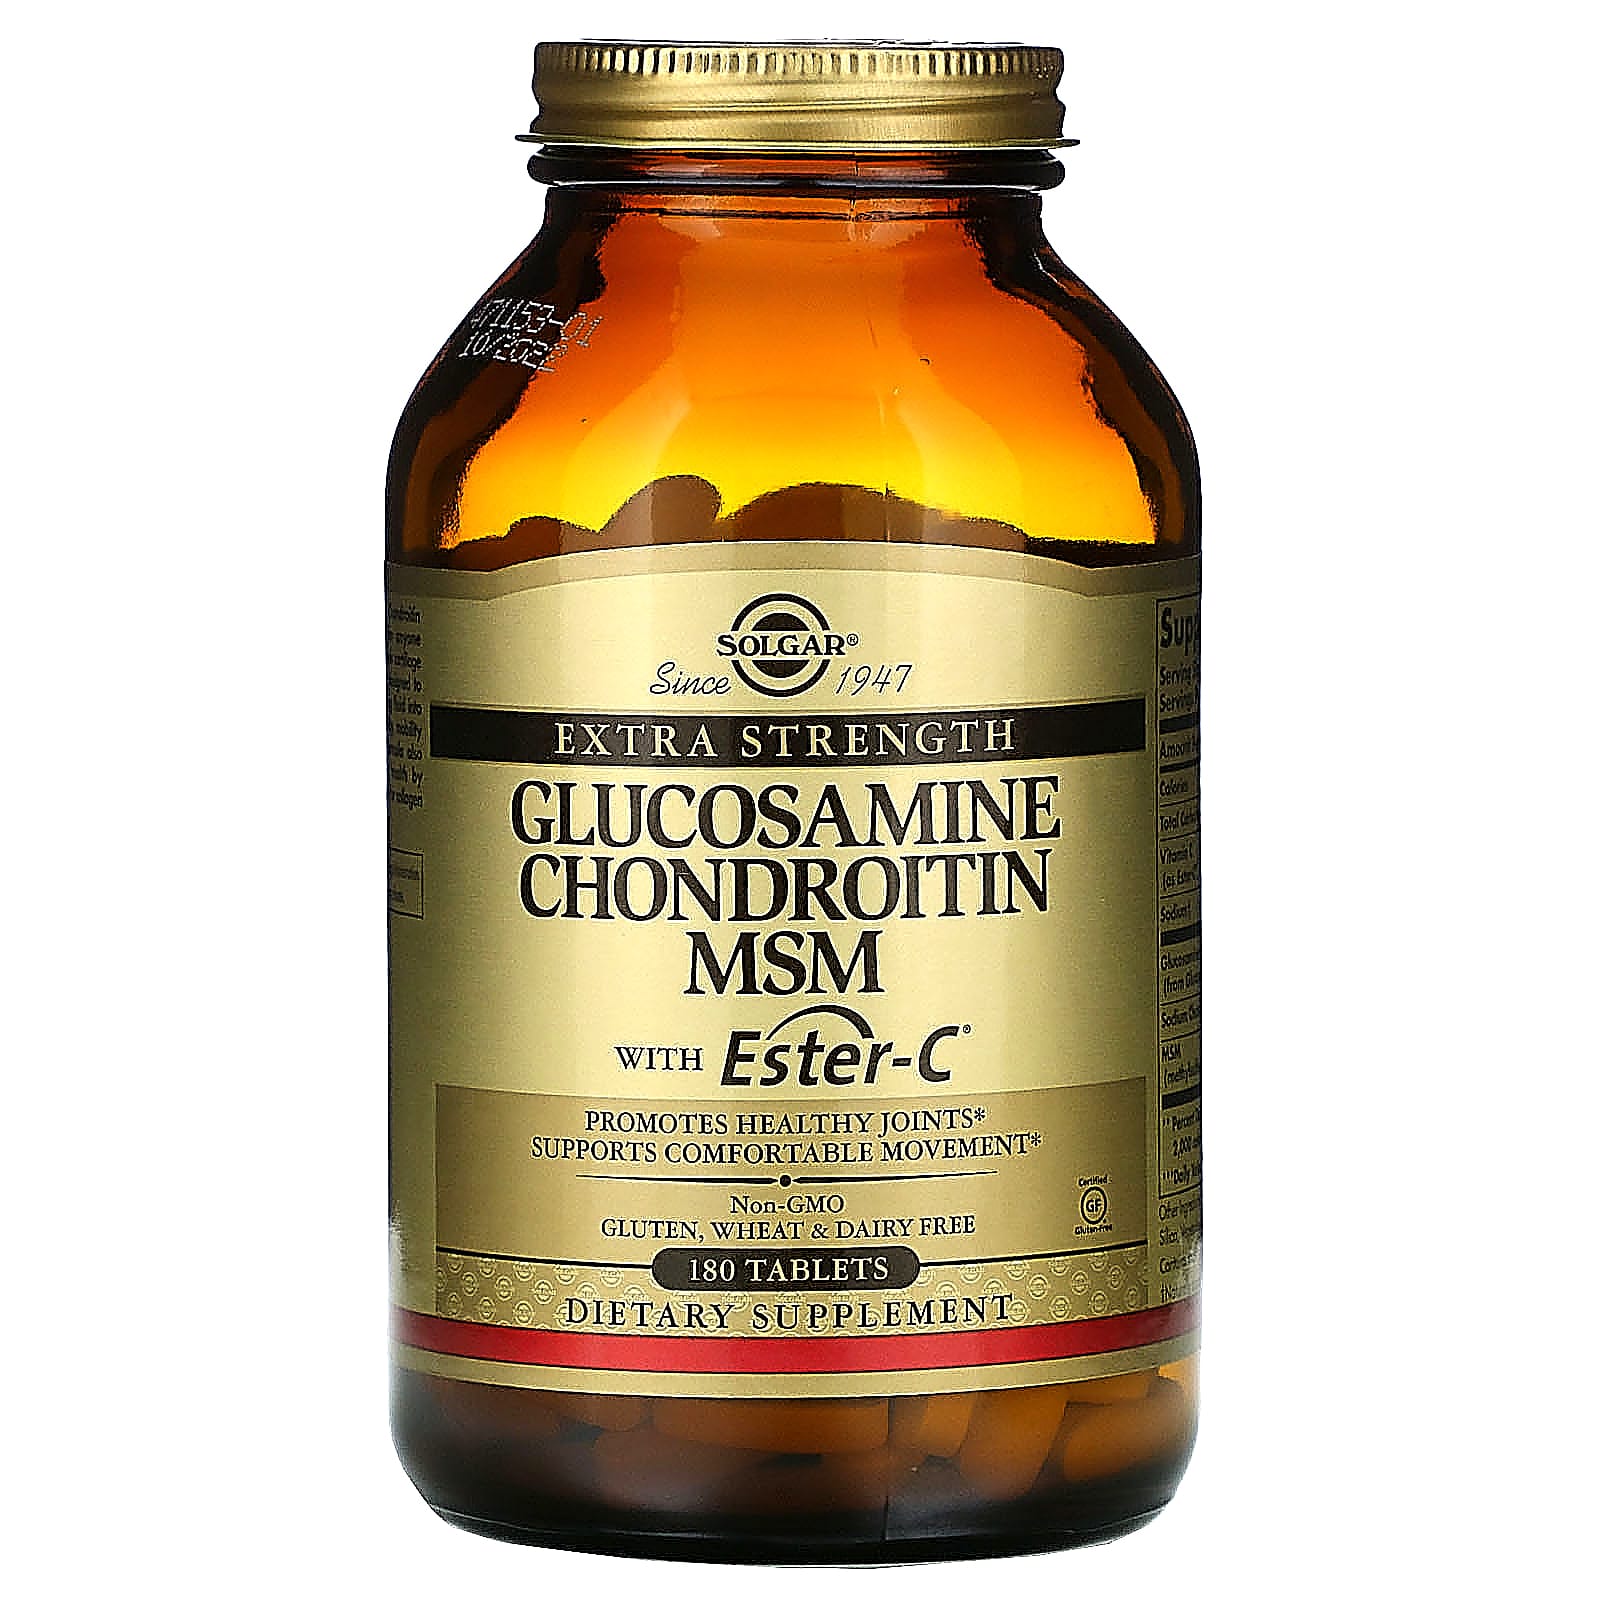 Solgar Extra Strength Glucosamine Chondroitin MSM With Ester-C 180 Tablets